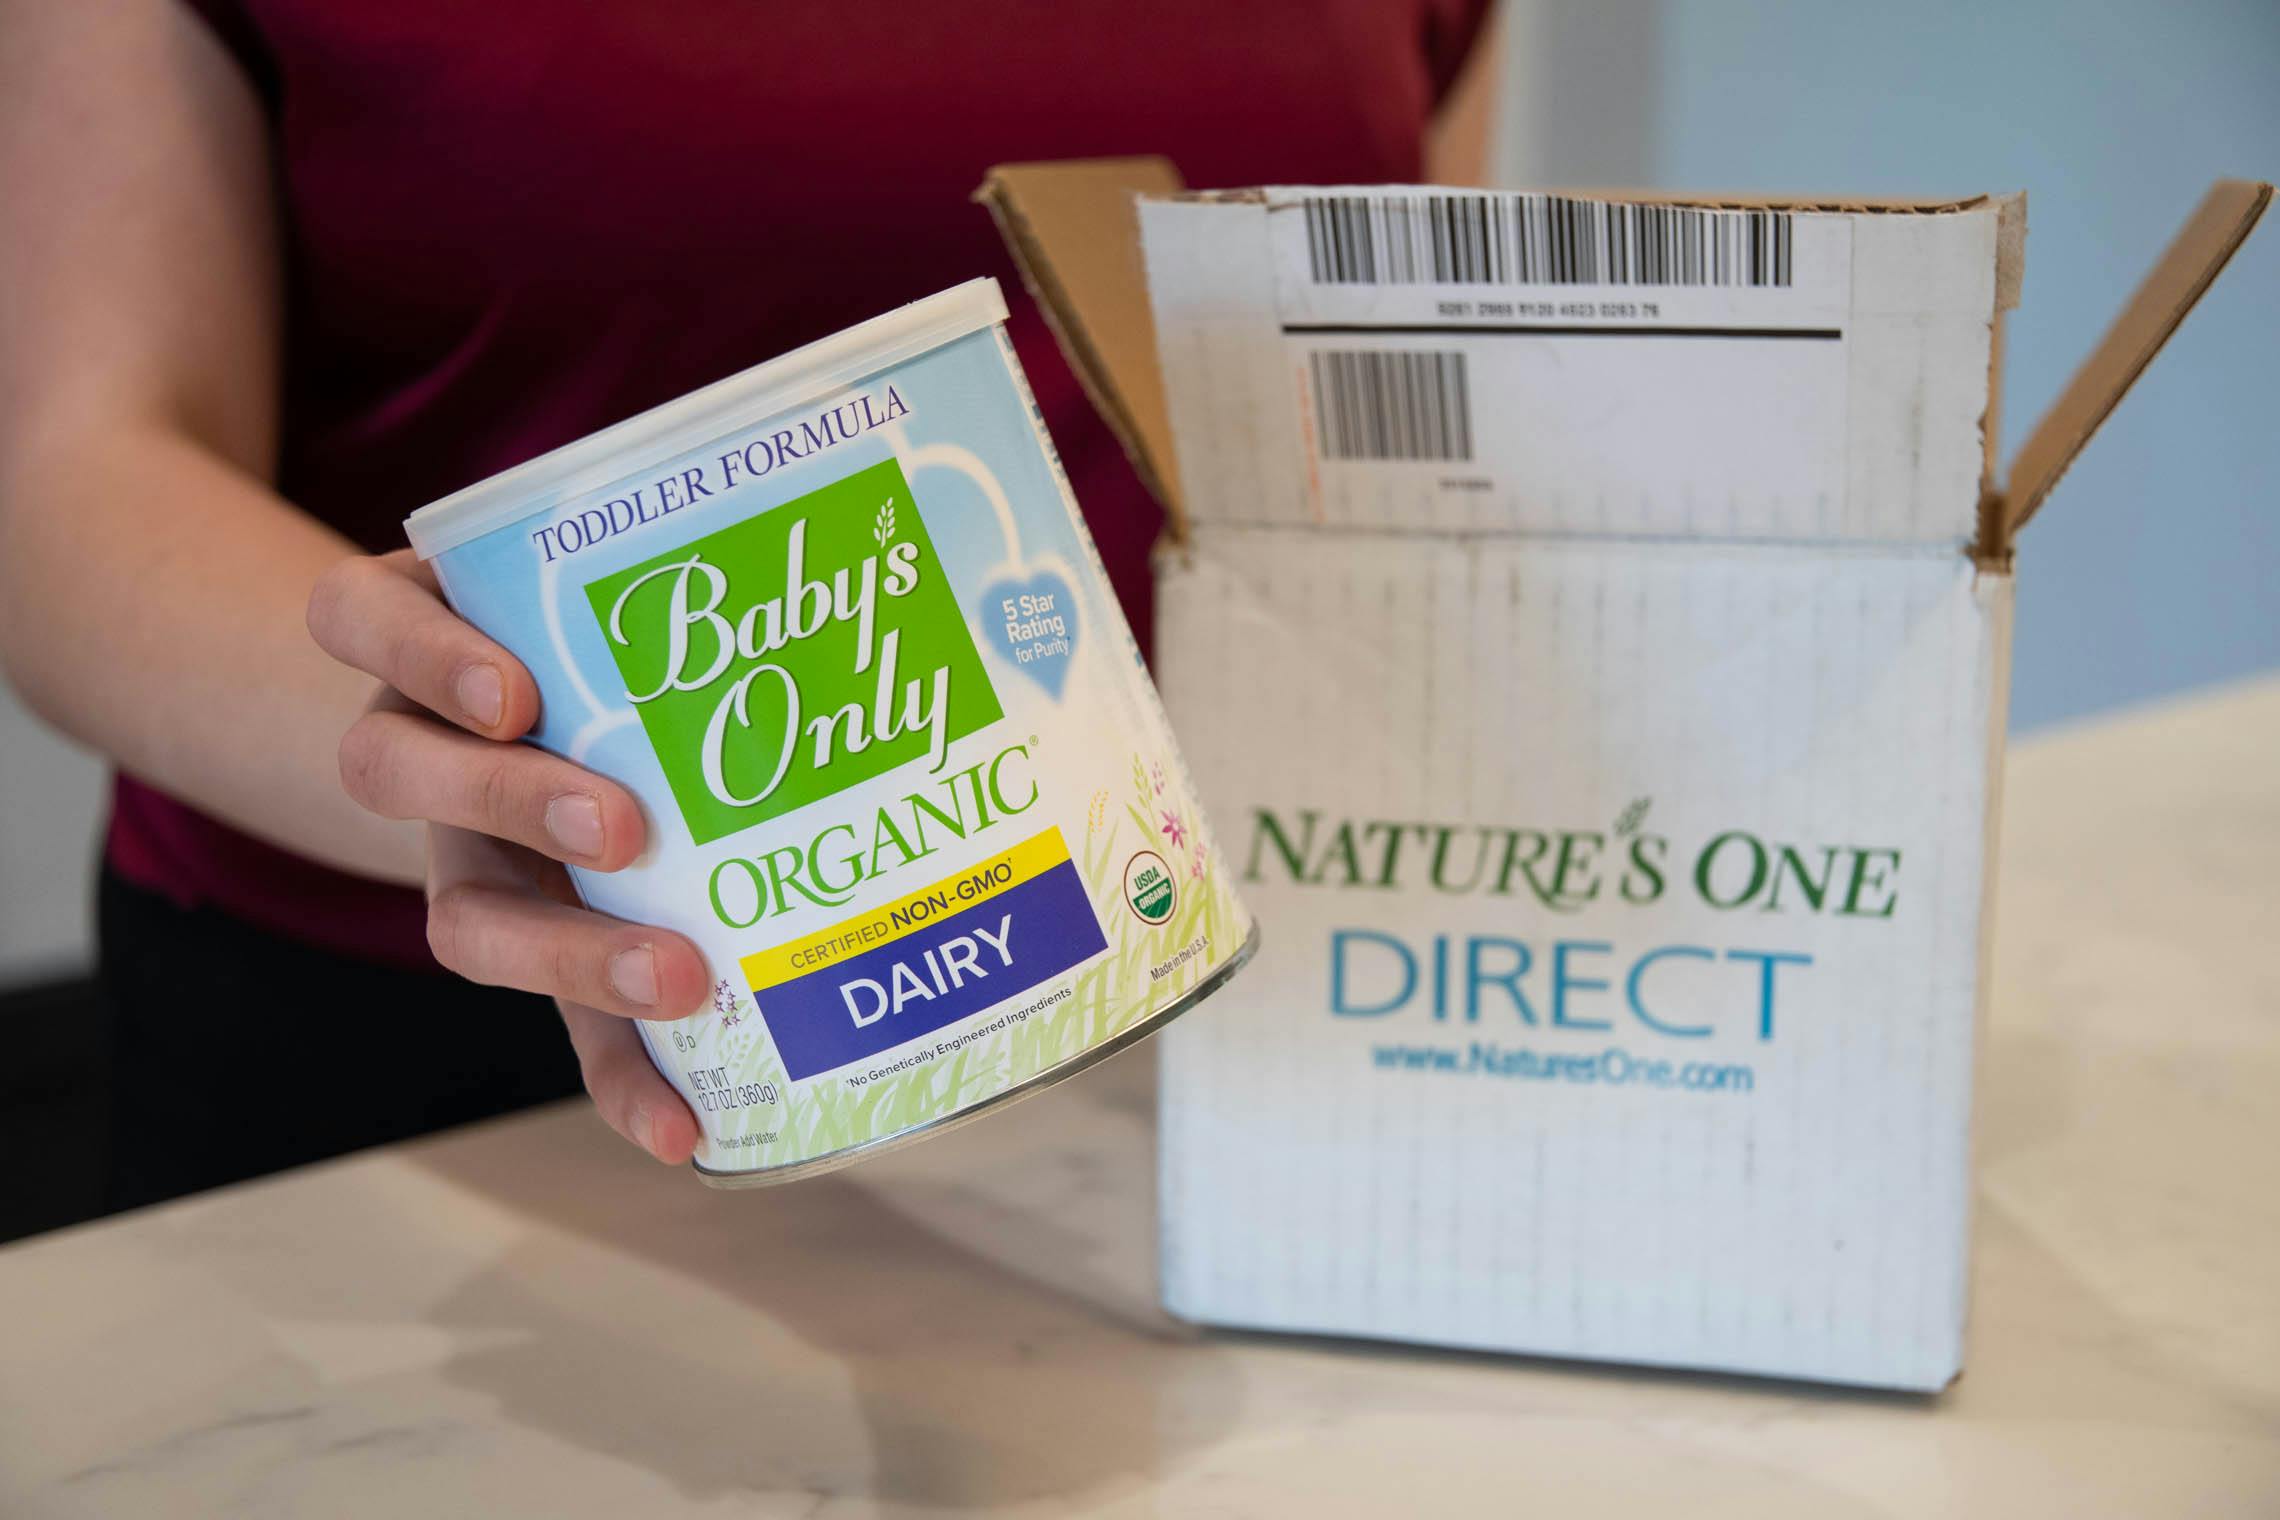 A person holding a canister of Baby's Only toddler organic formula in front of a Nature's One Direct box..